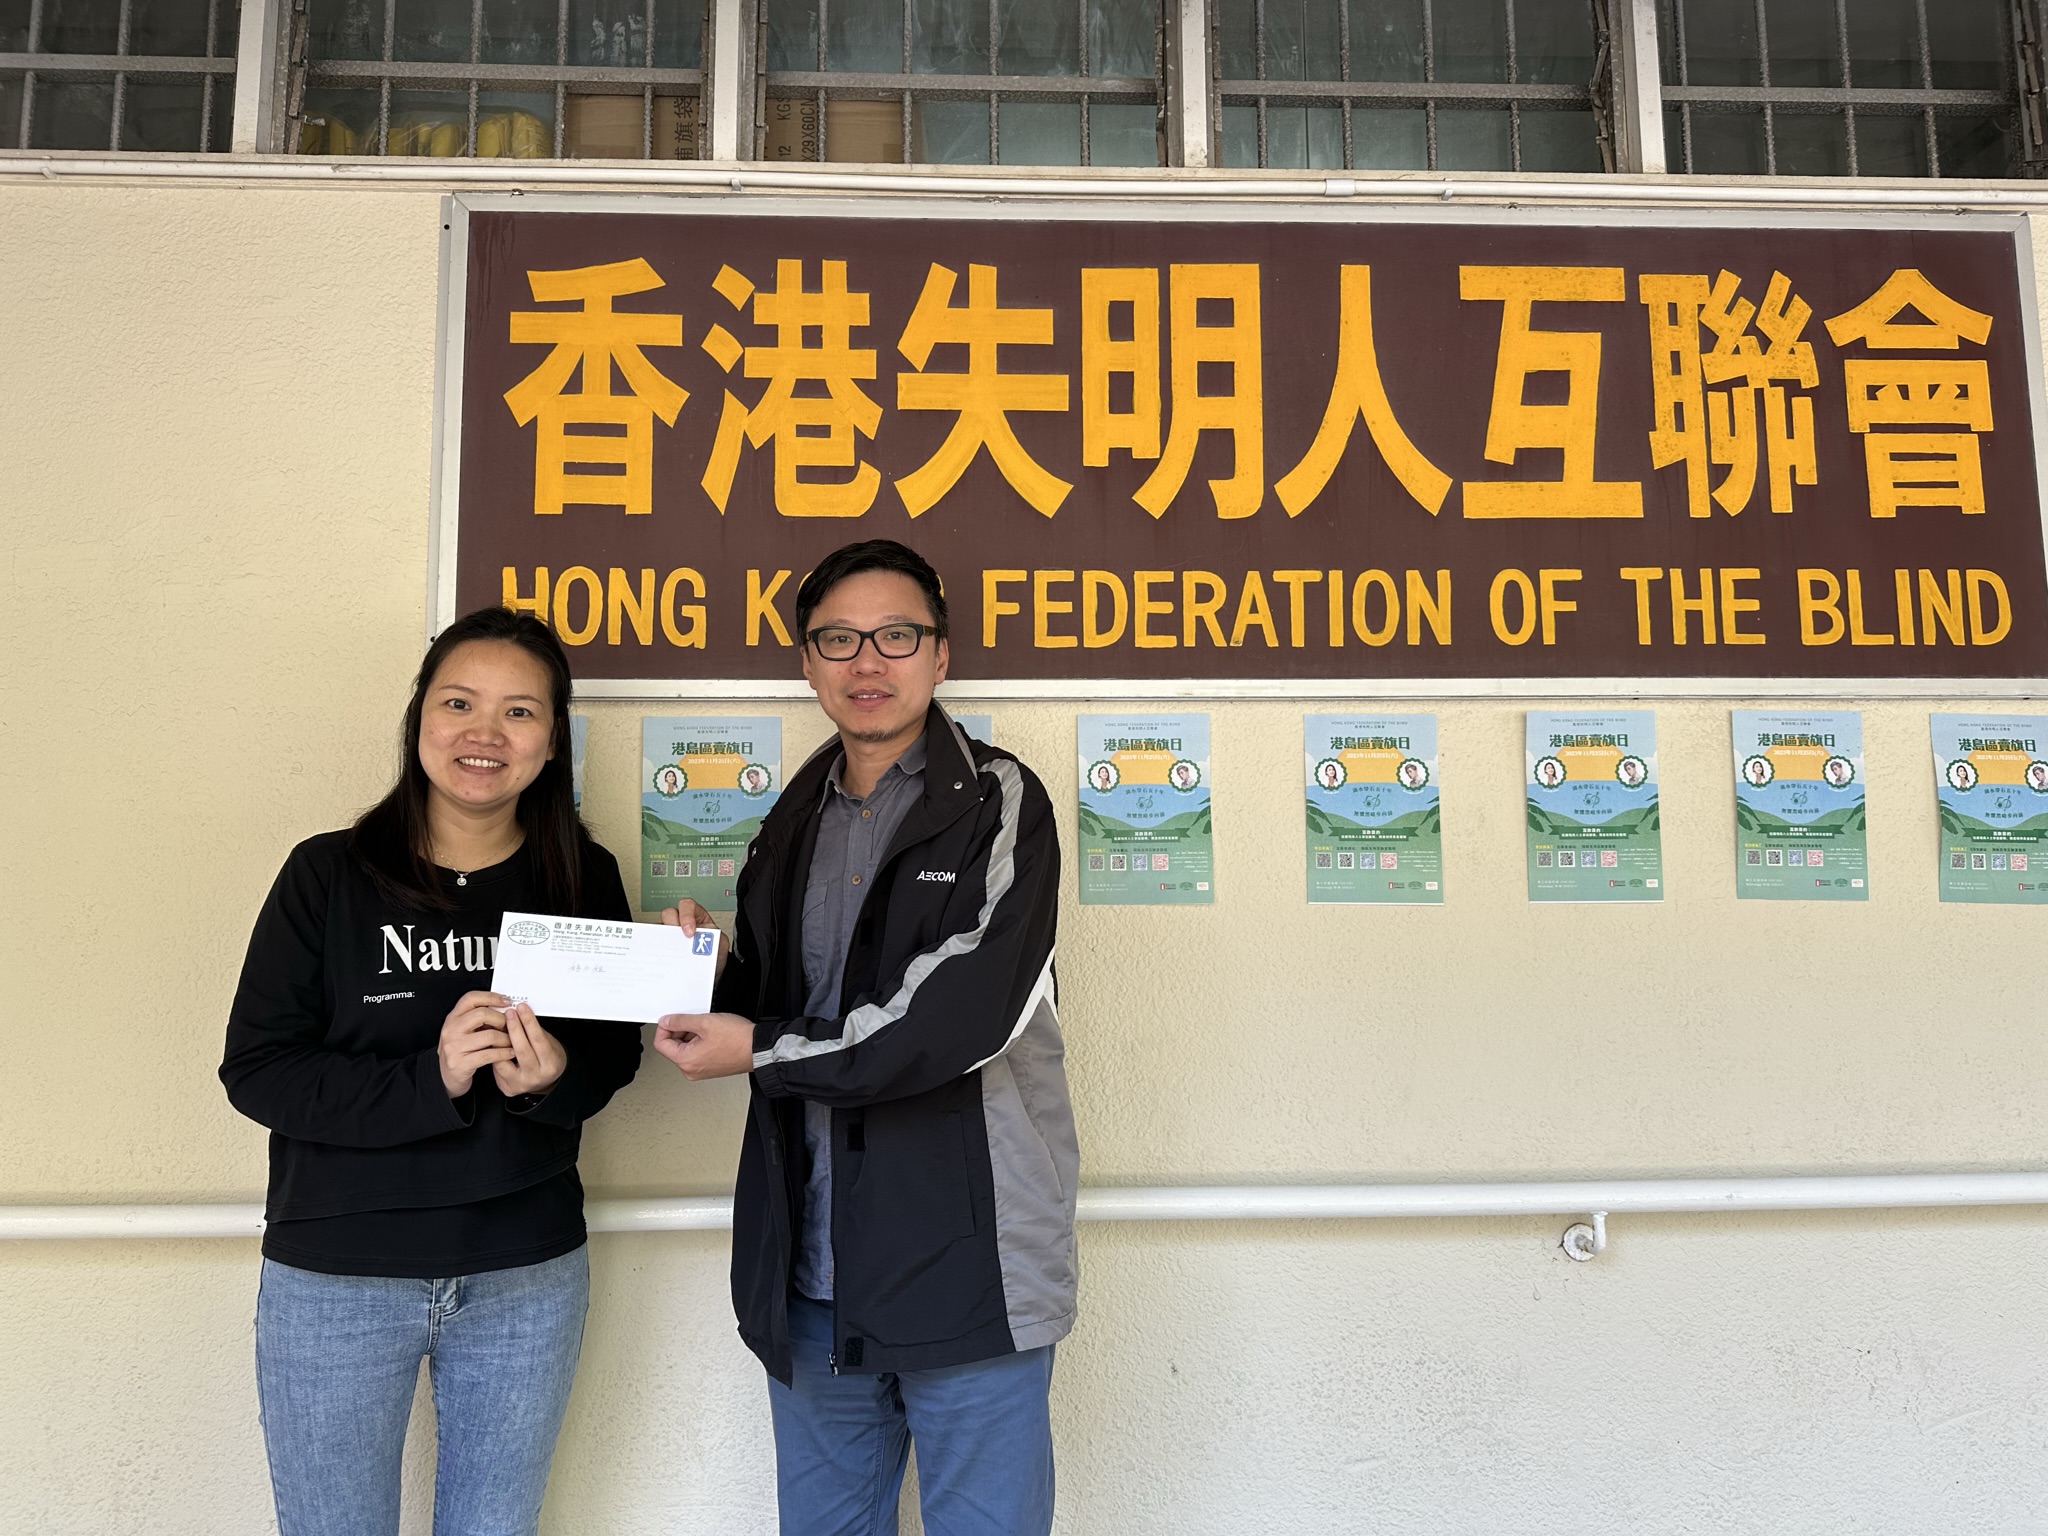 Hong Kong Federation of the Blind grant a thank you letter to the engineering team for assist visually impaired people to improve PCF.